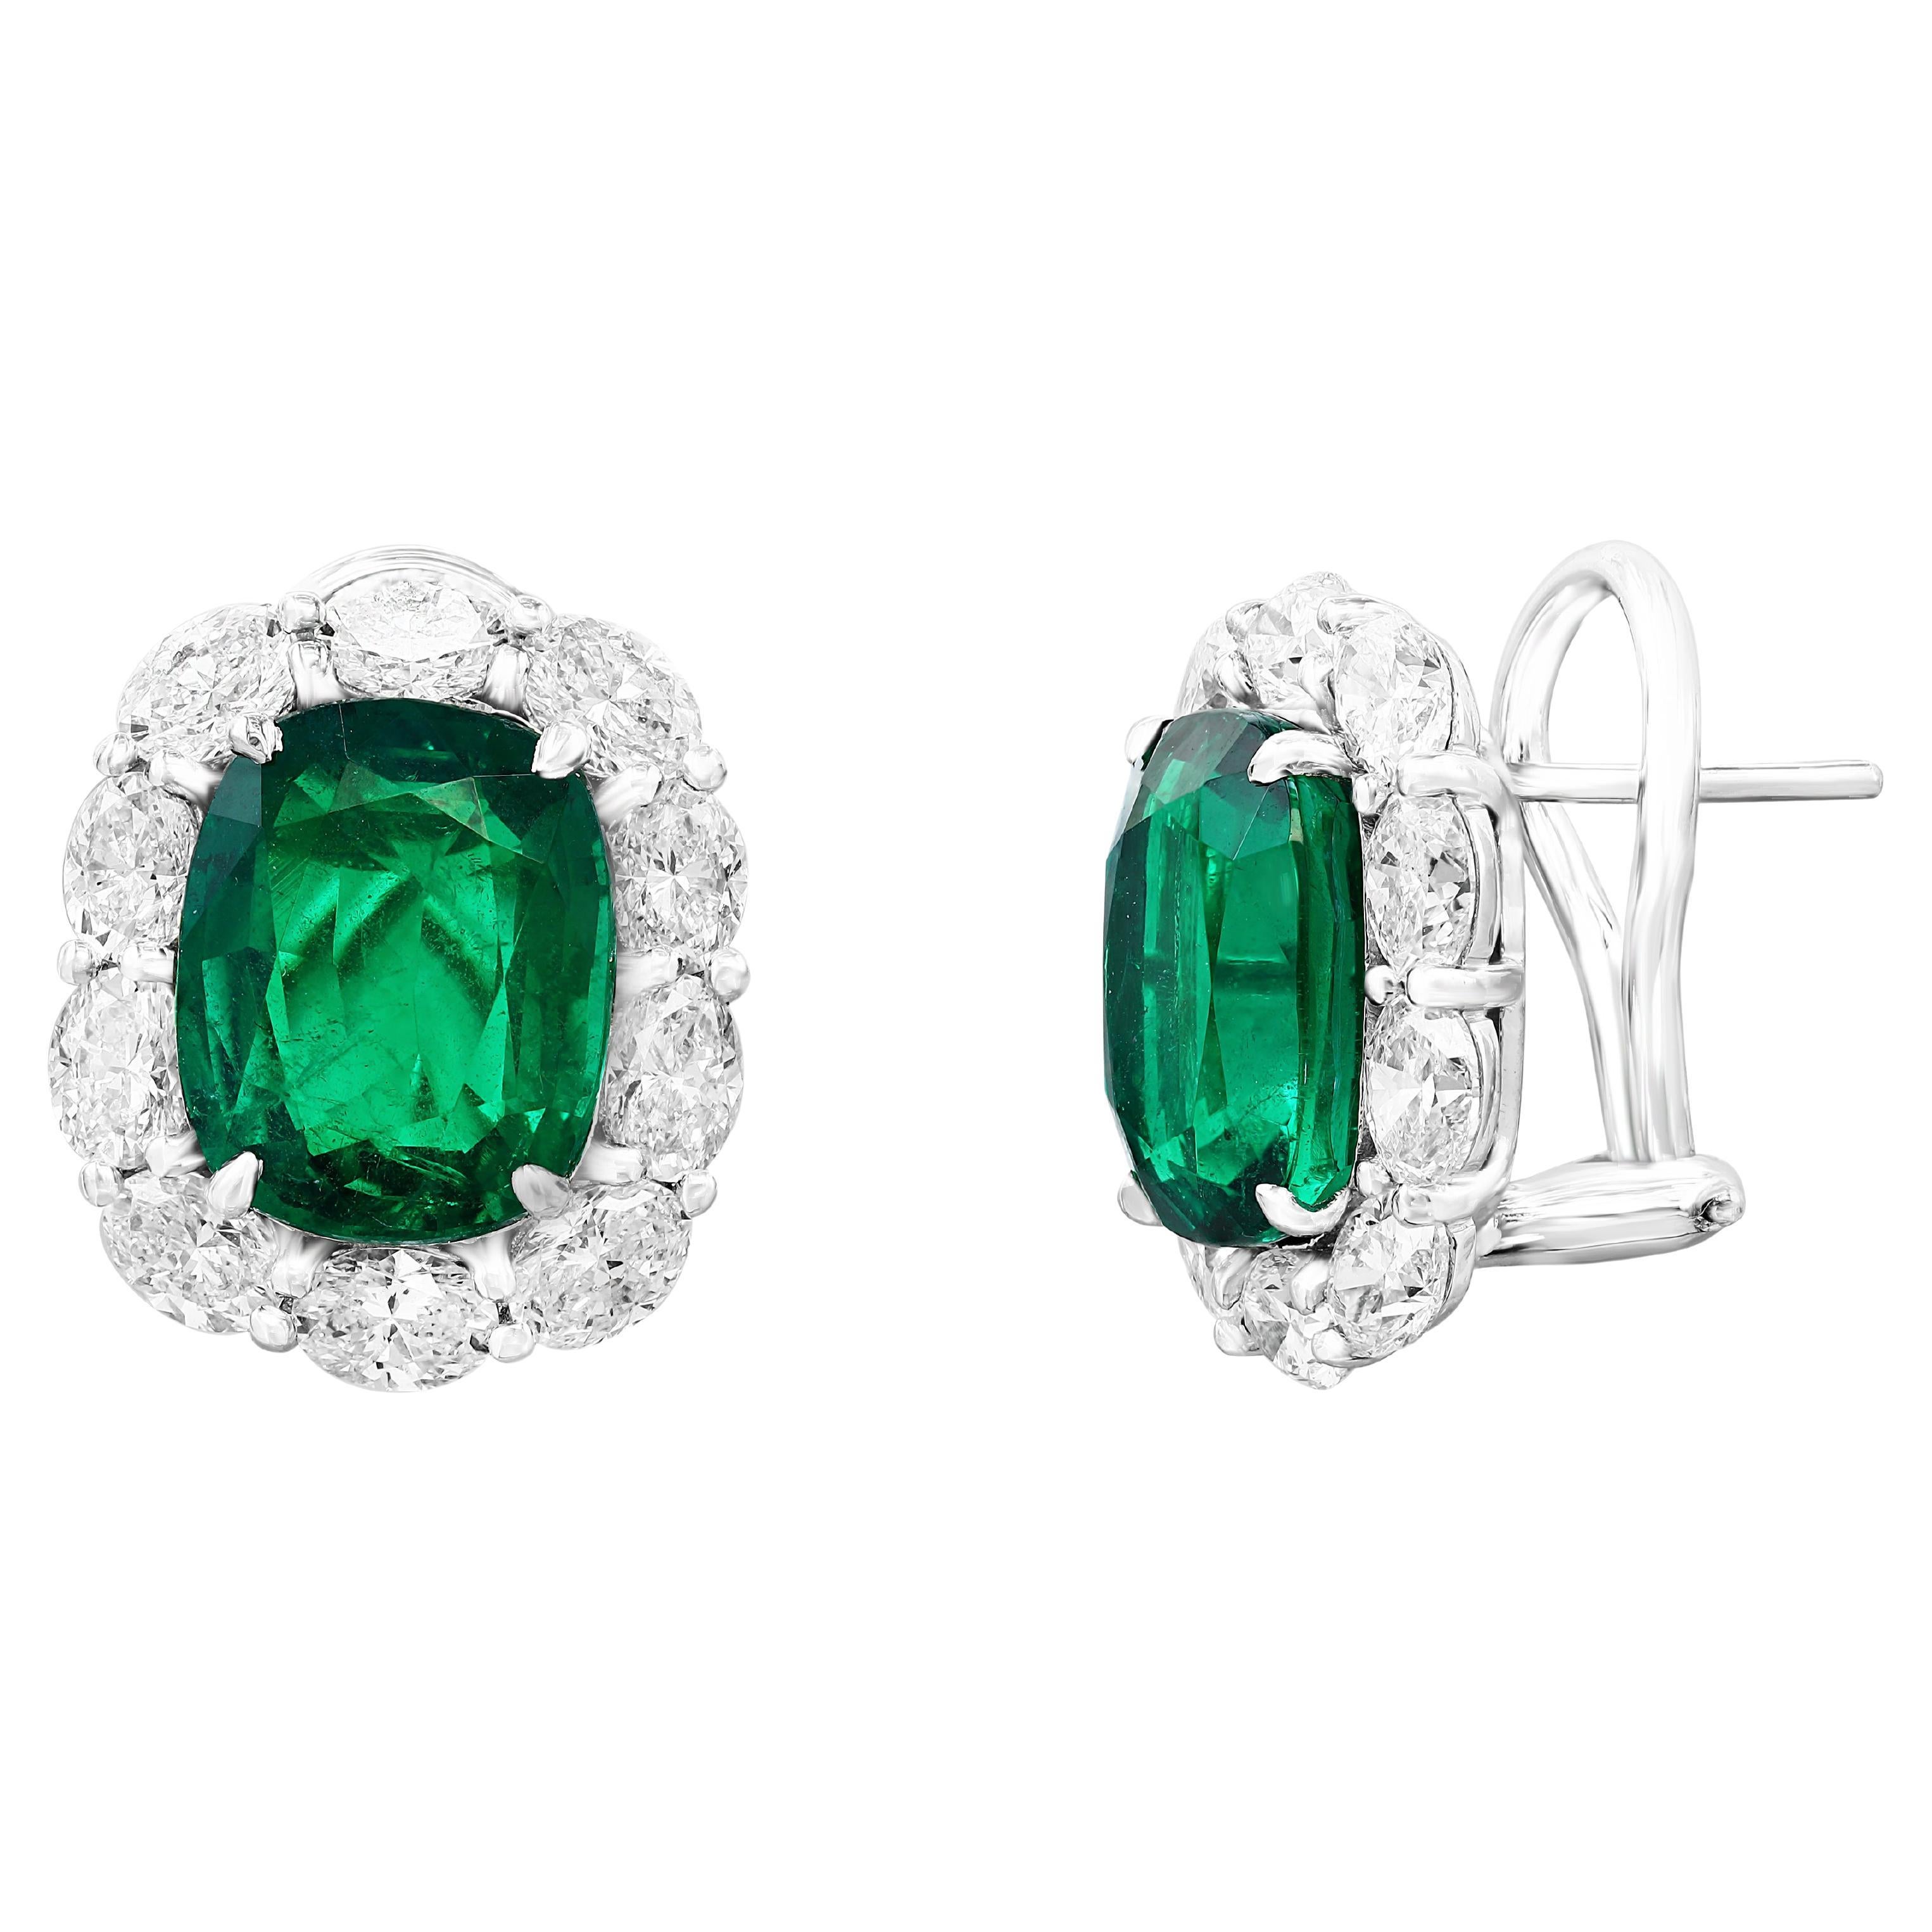 7.77 Carat Cushion Cut Emerald and Diamond Halo Earring in 18K White Gold For Sale